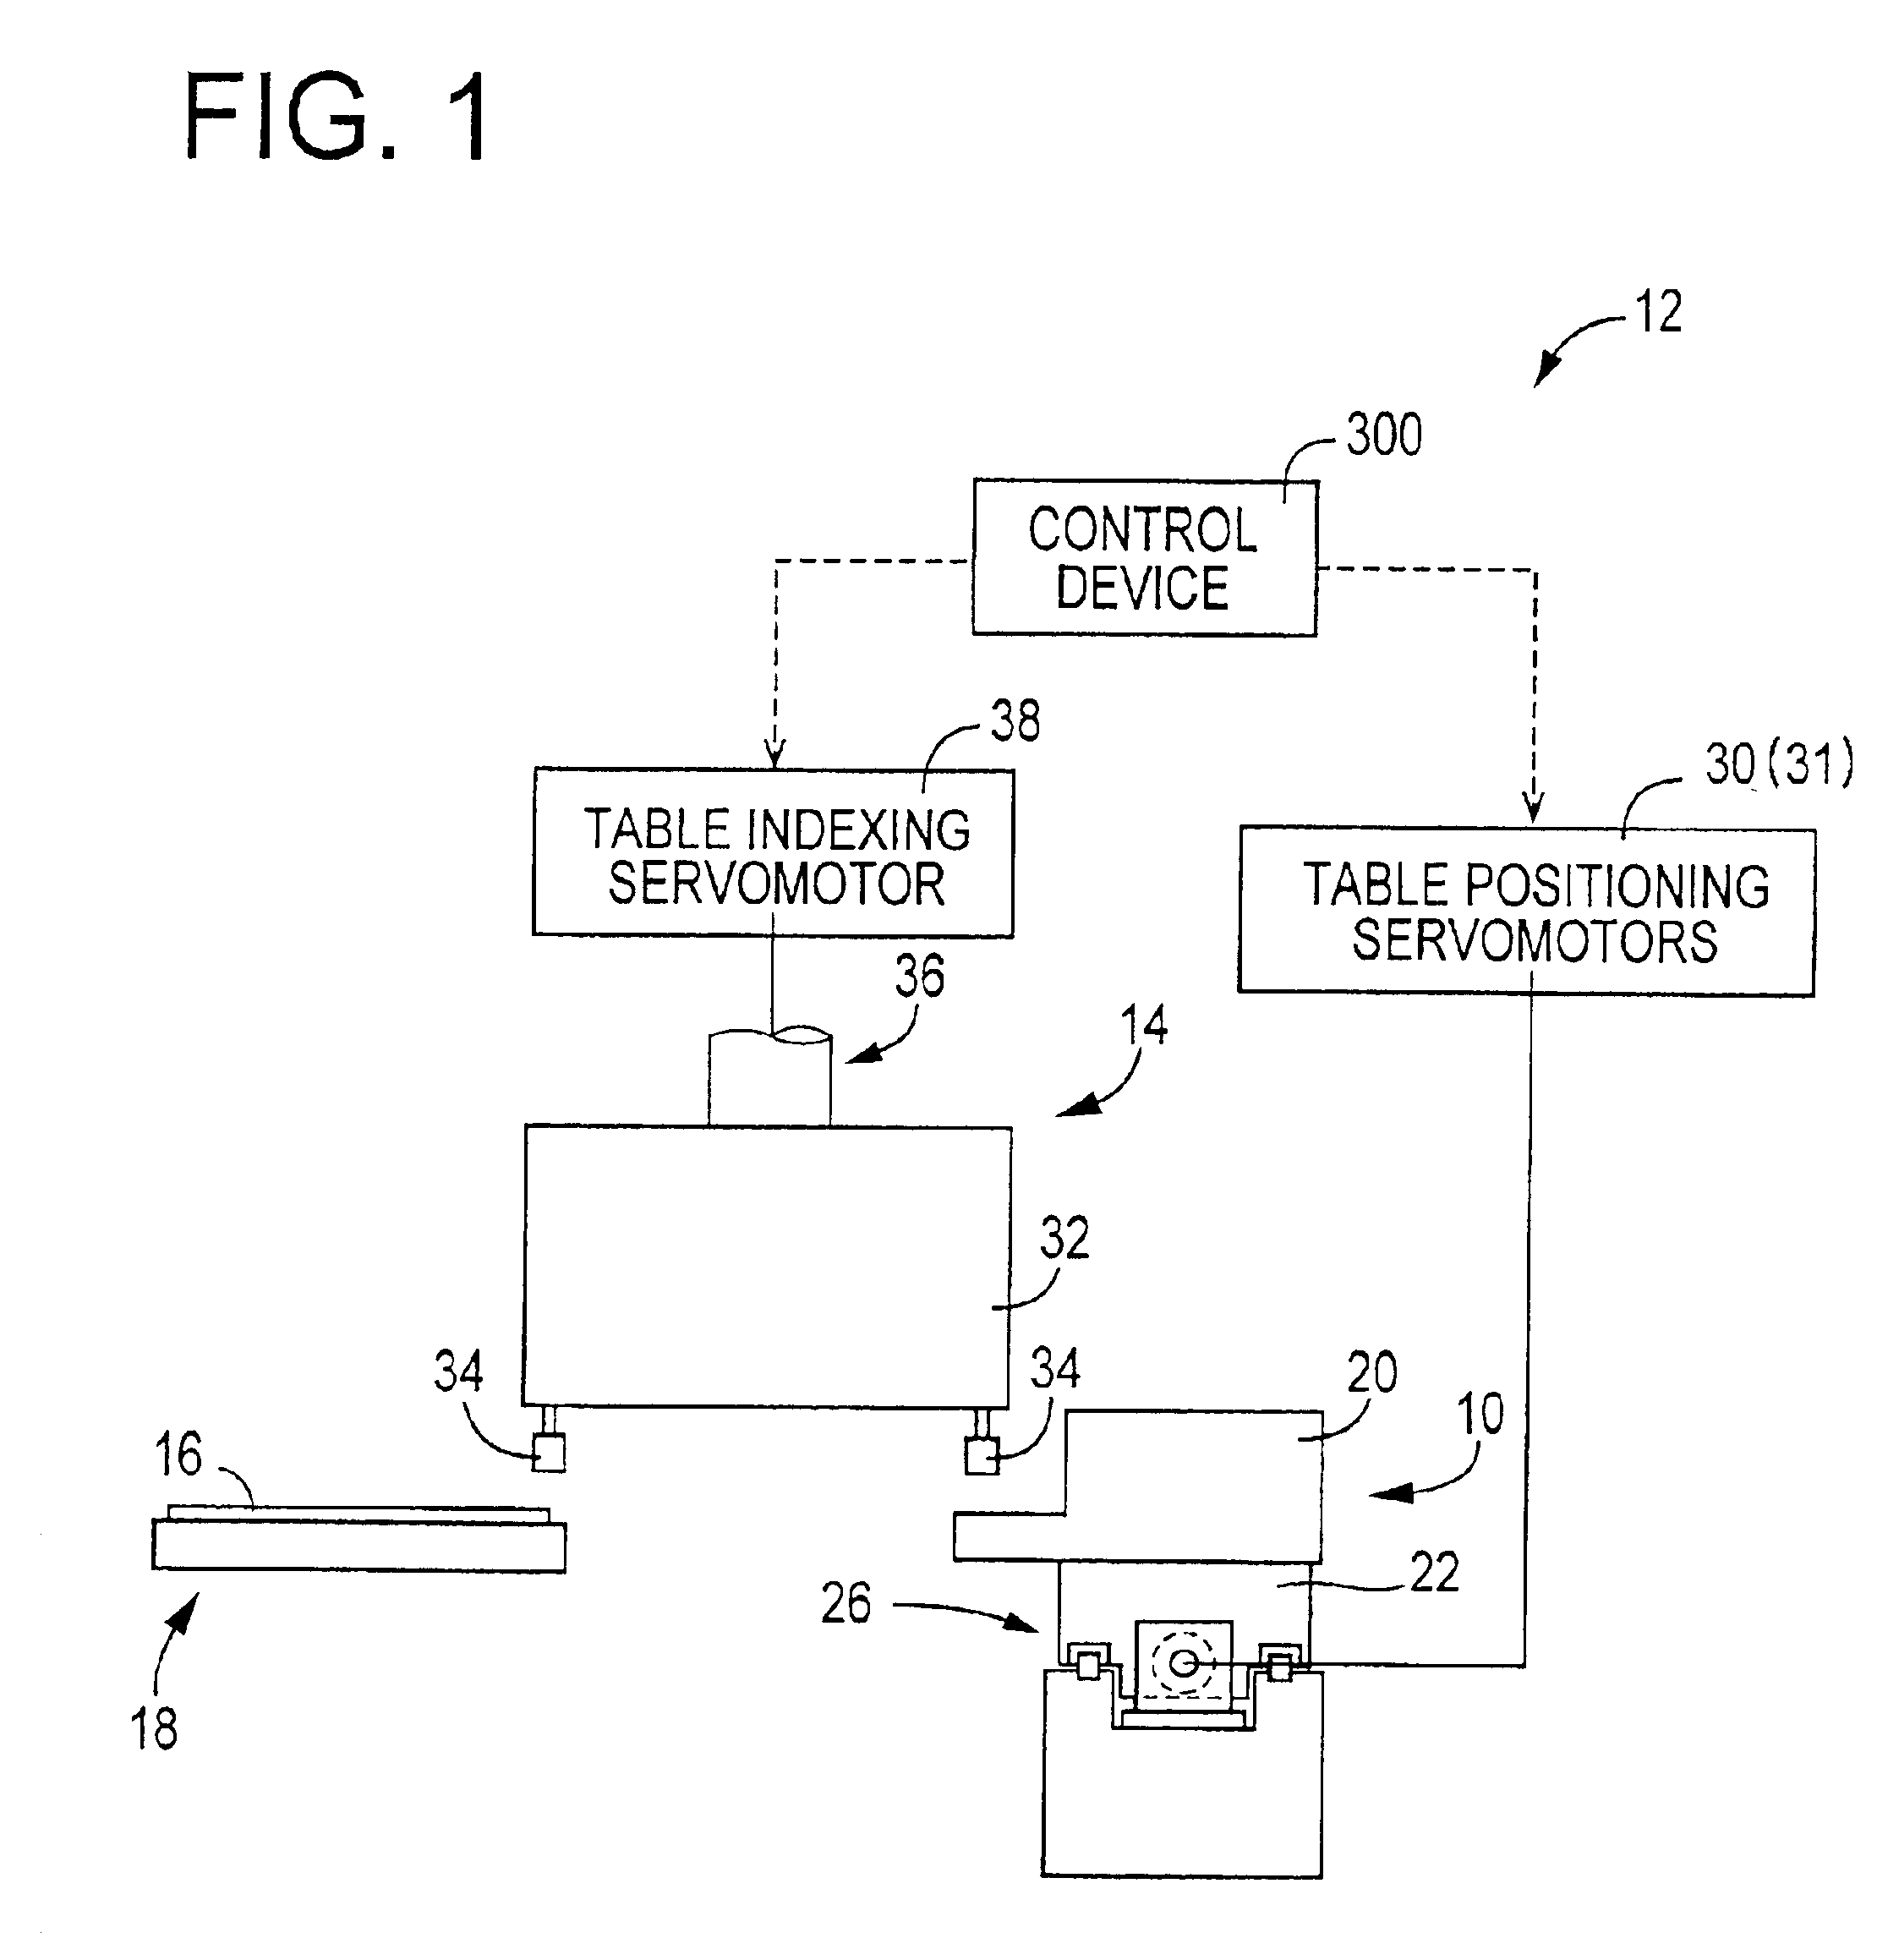 Apparatus for assisting operator in performing manual operations in connection with component feeders